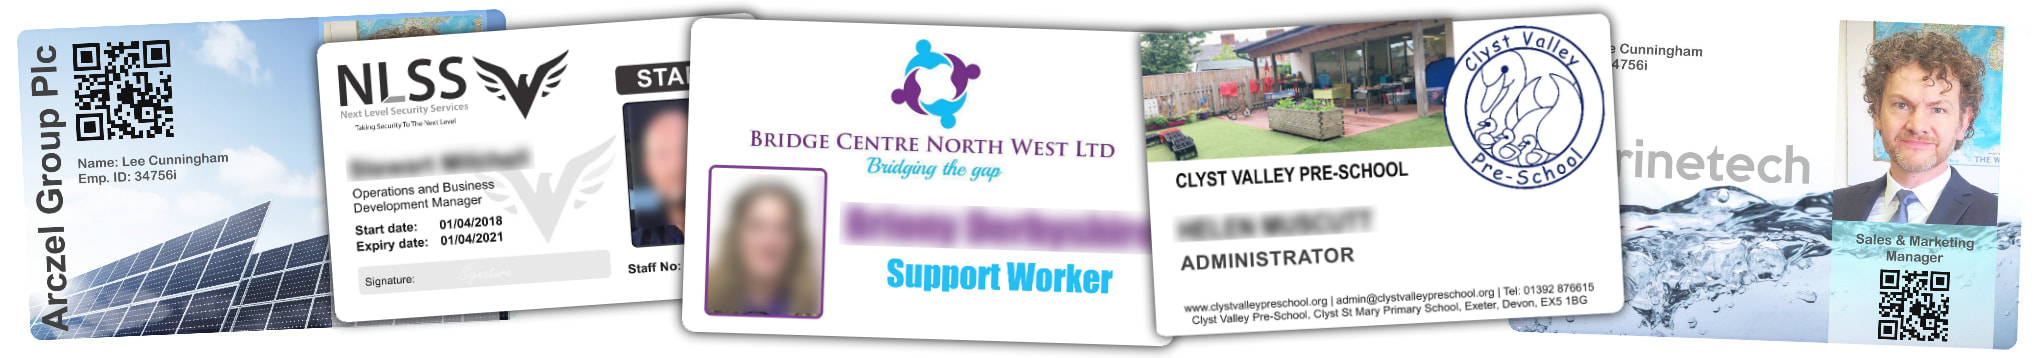 Rossendale examples of staff photo ID cards | samples of employee Identity card printing | Workers ID cards printed in 